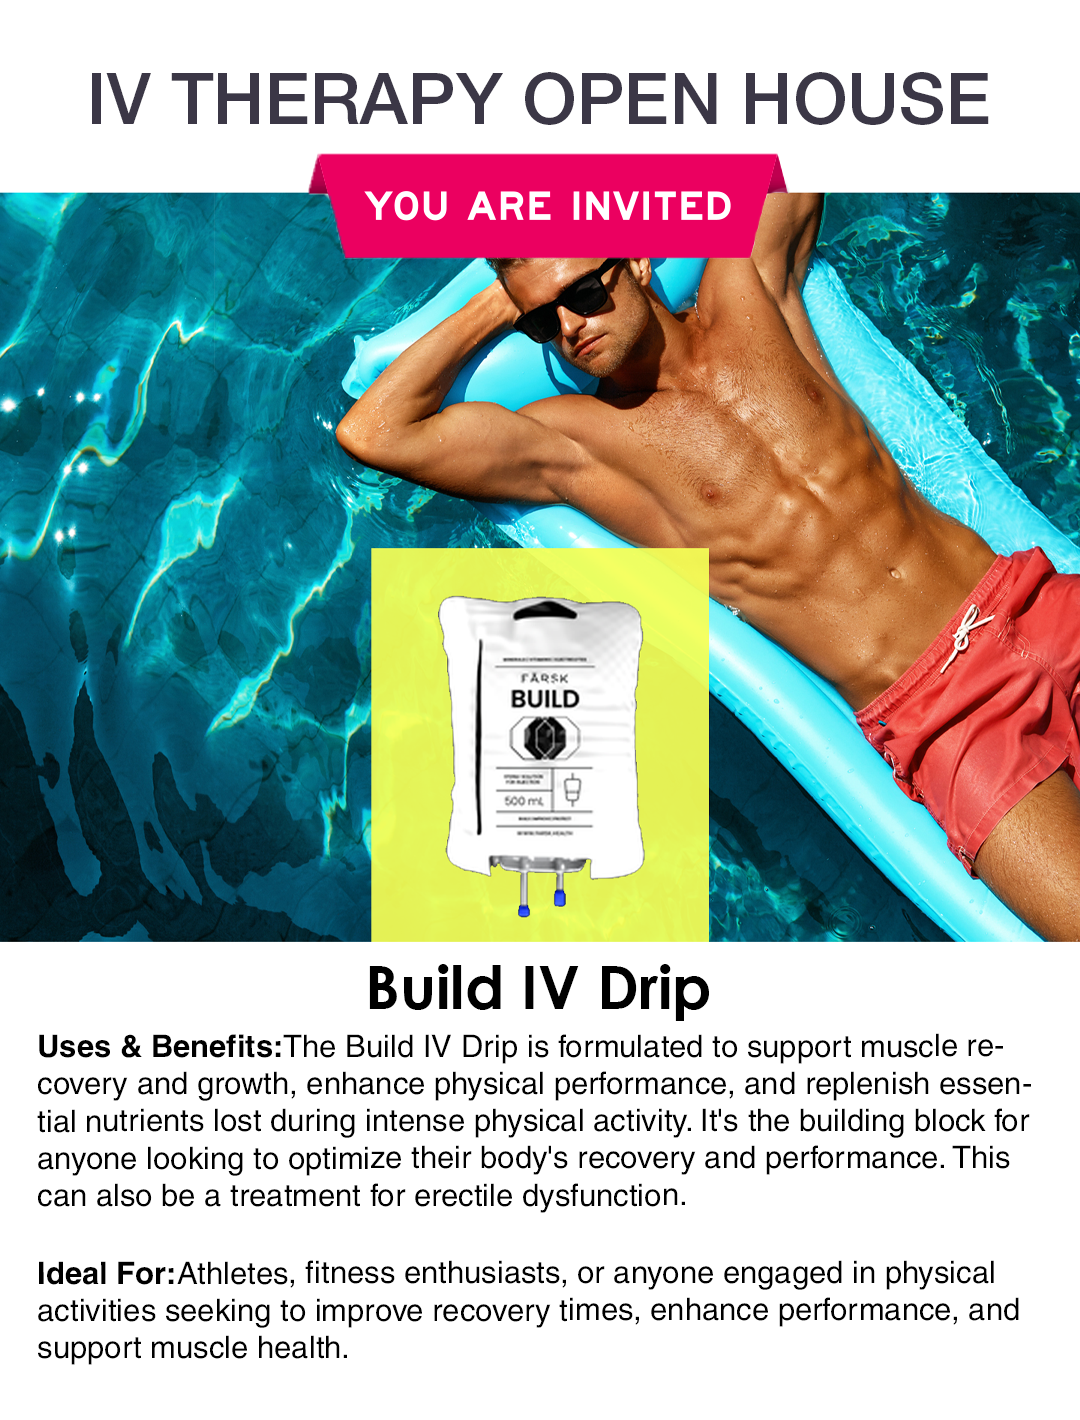 Build IV Drip session at The Lip Doctor for muscle recovery and performance enhancement